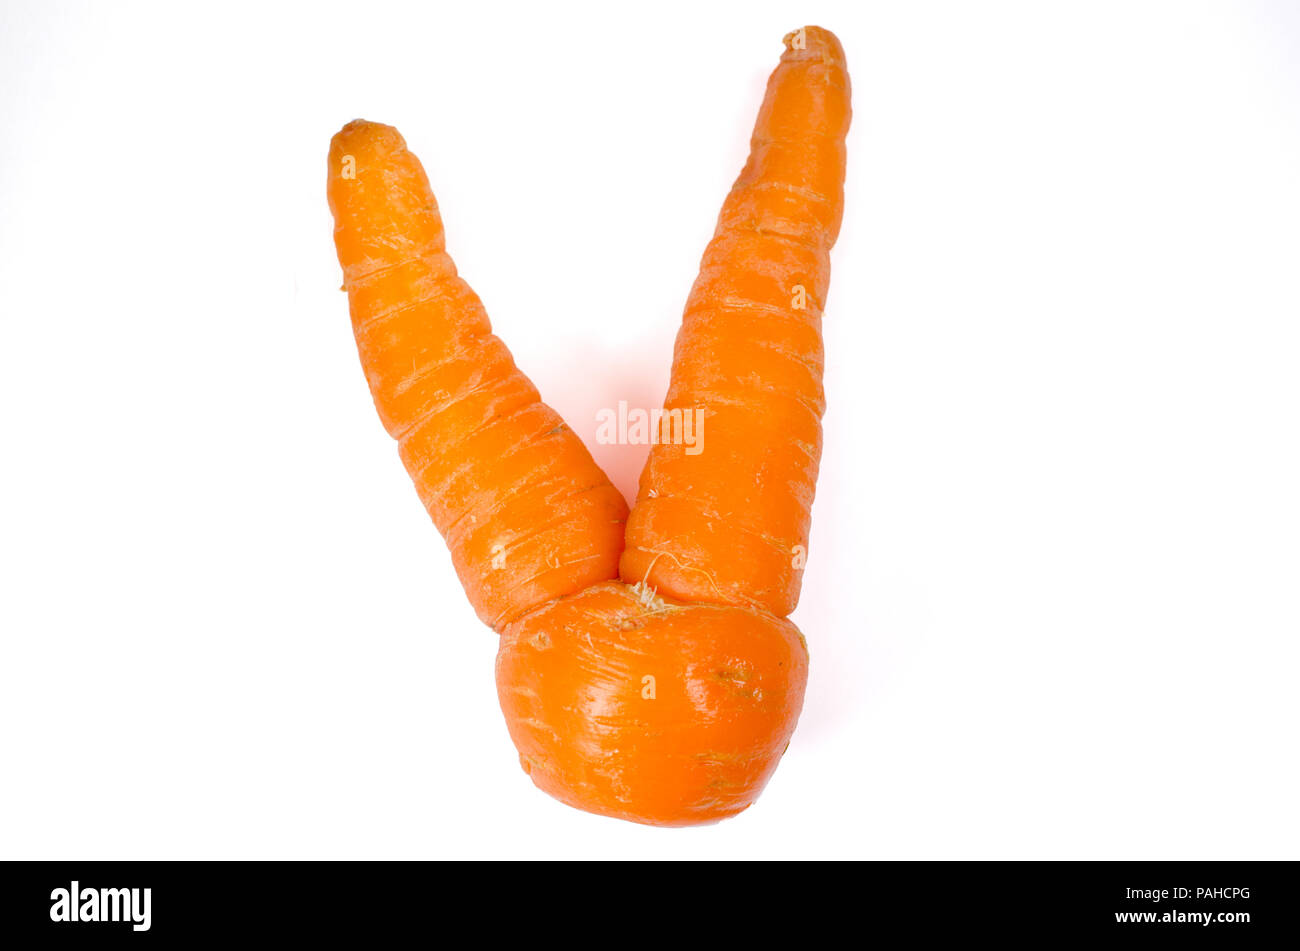 Wobbly vegetable with double carrot Stock Photo